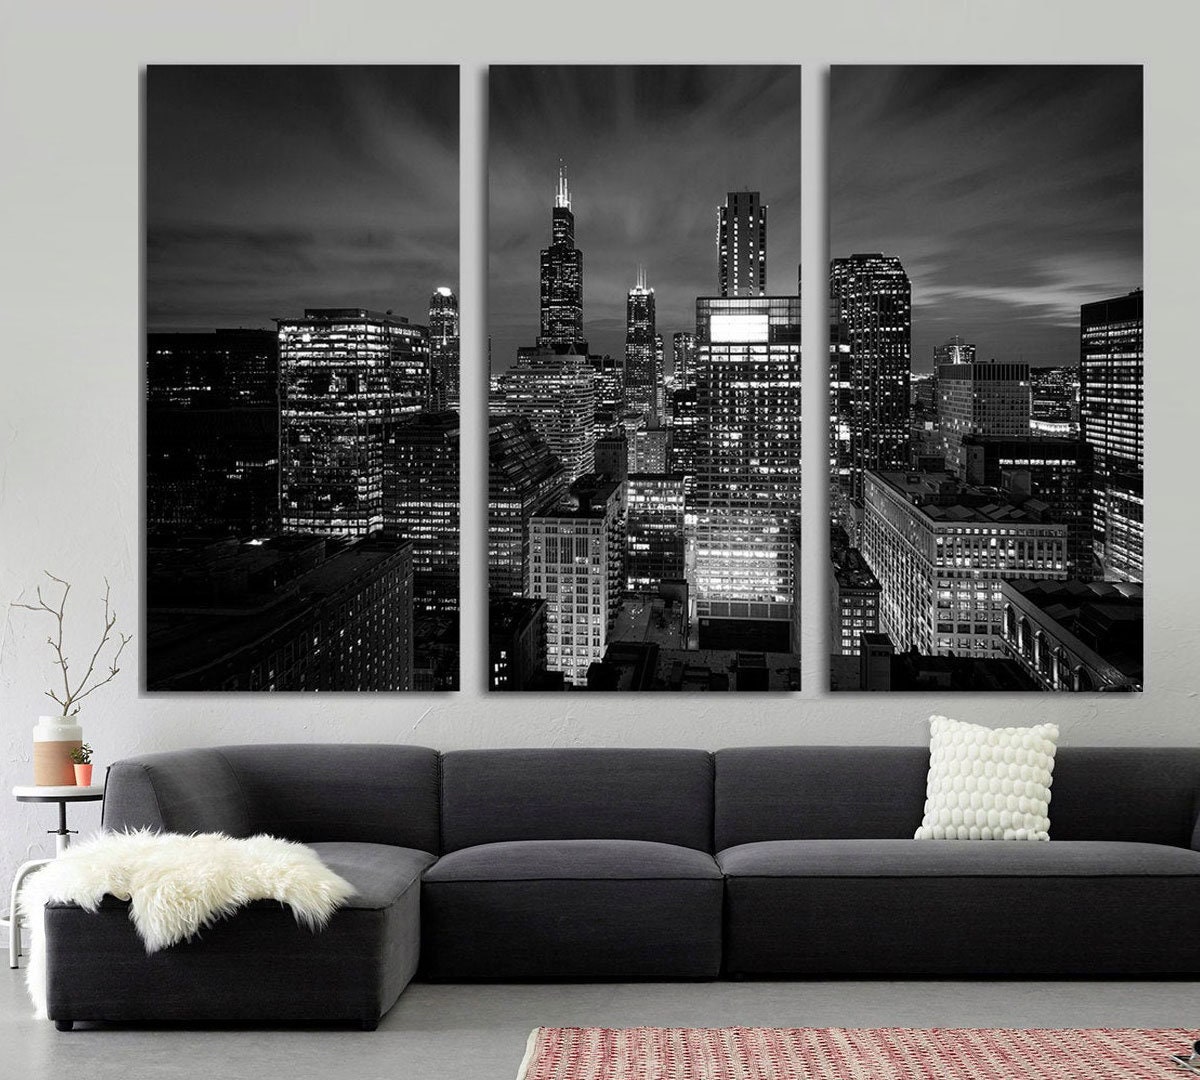 LOVE FAMILY QUOTE BLACK WHITE GREY CANVAS WALL ART PICTURE 4 PANEL SPLIT 